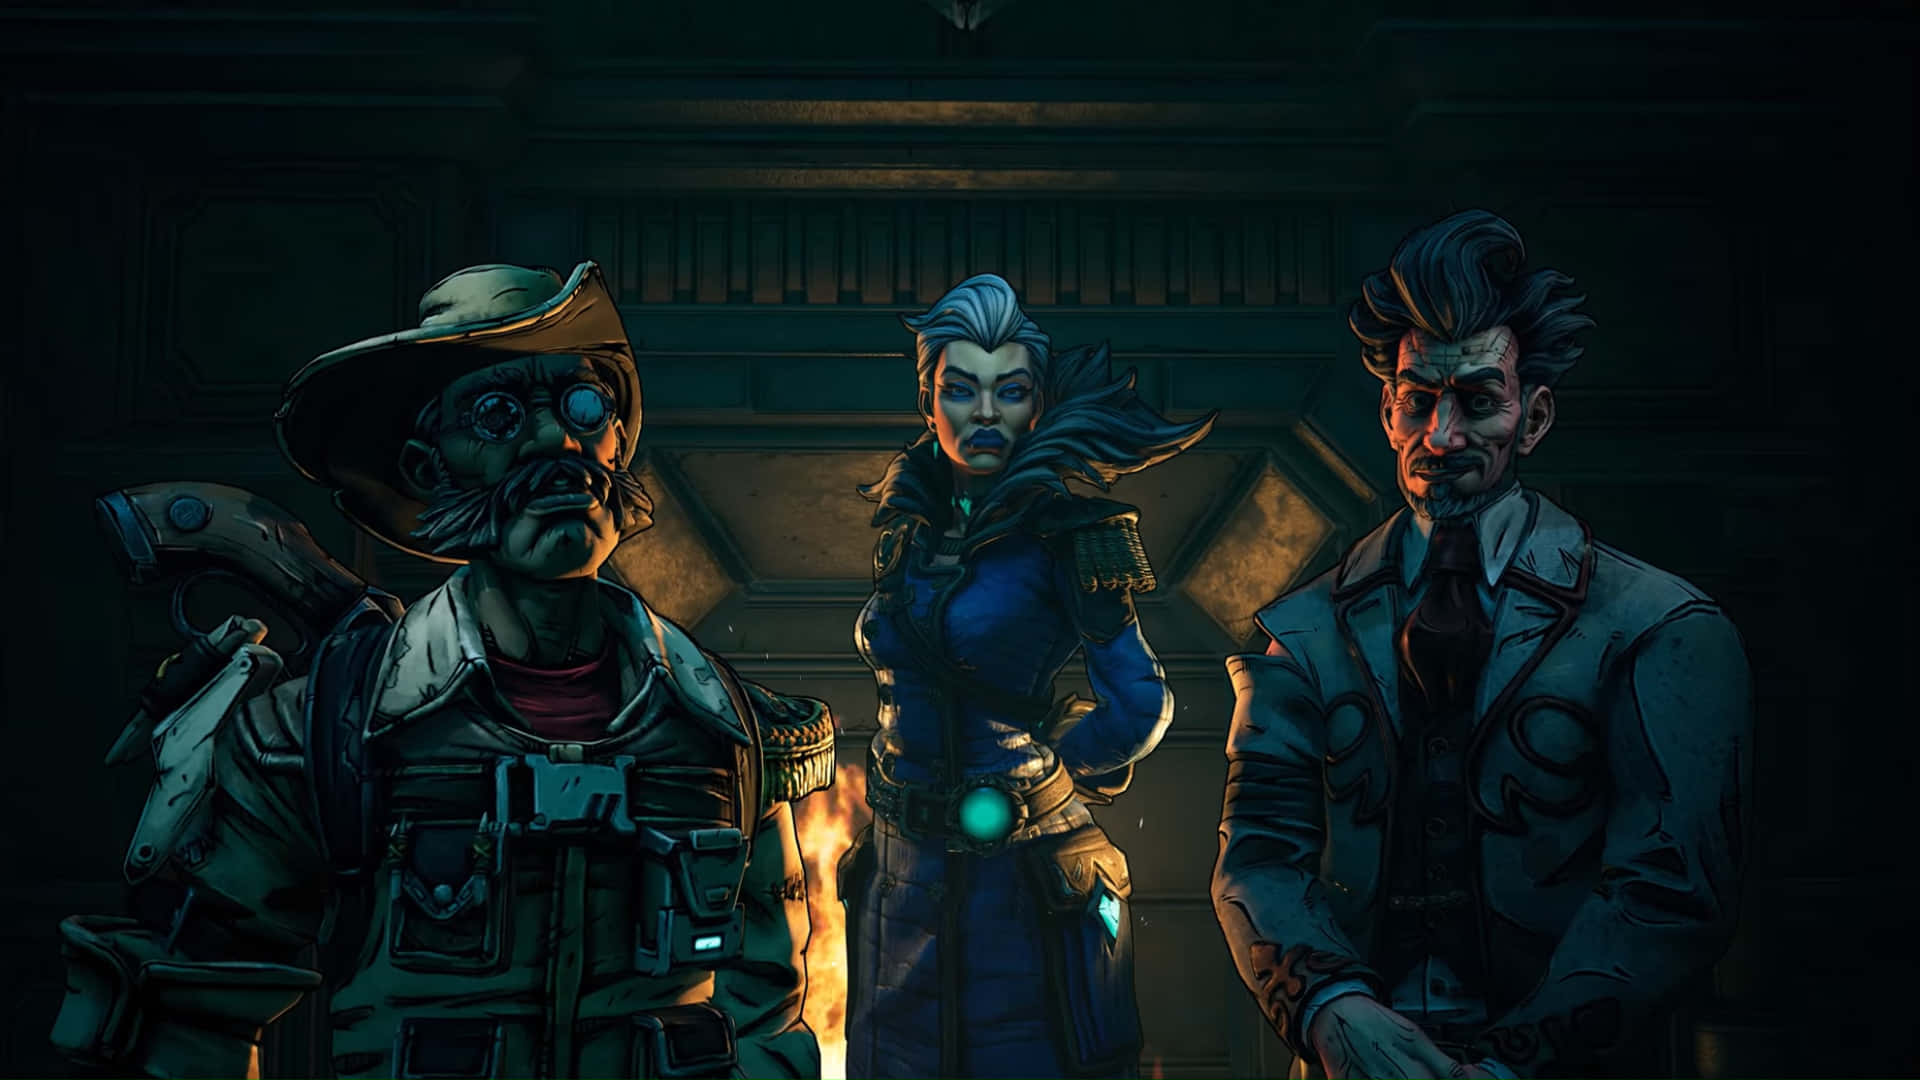 Shoot and loot with Borderlands 3 in stunning 1080p